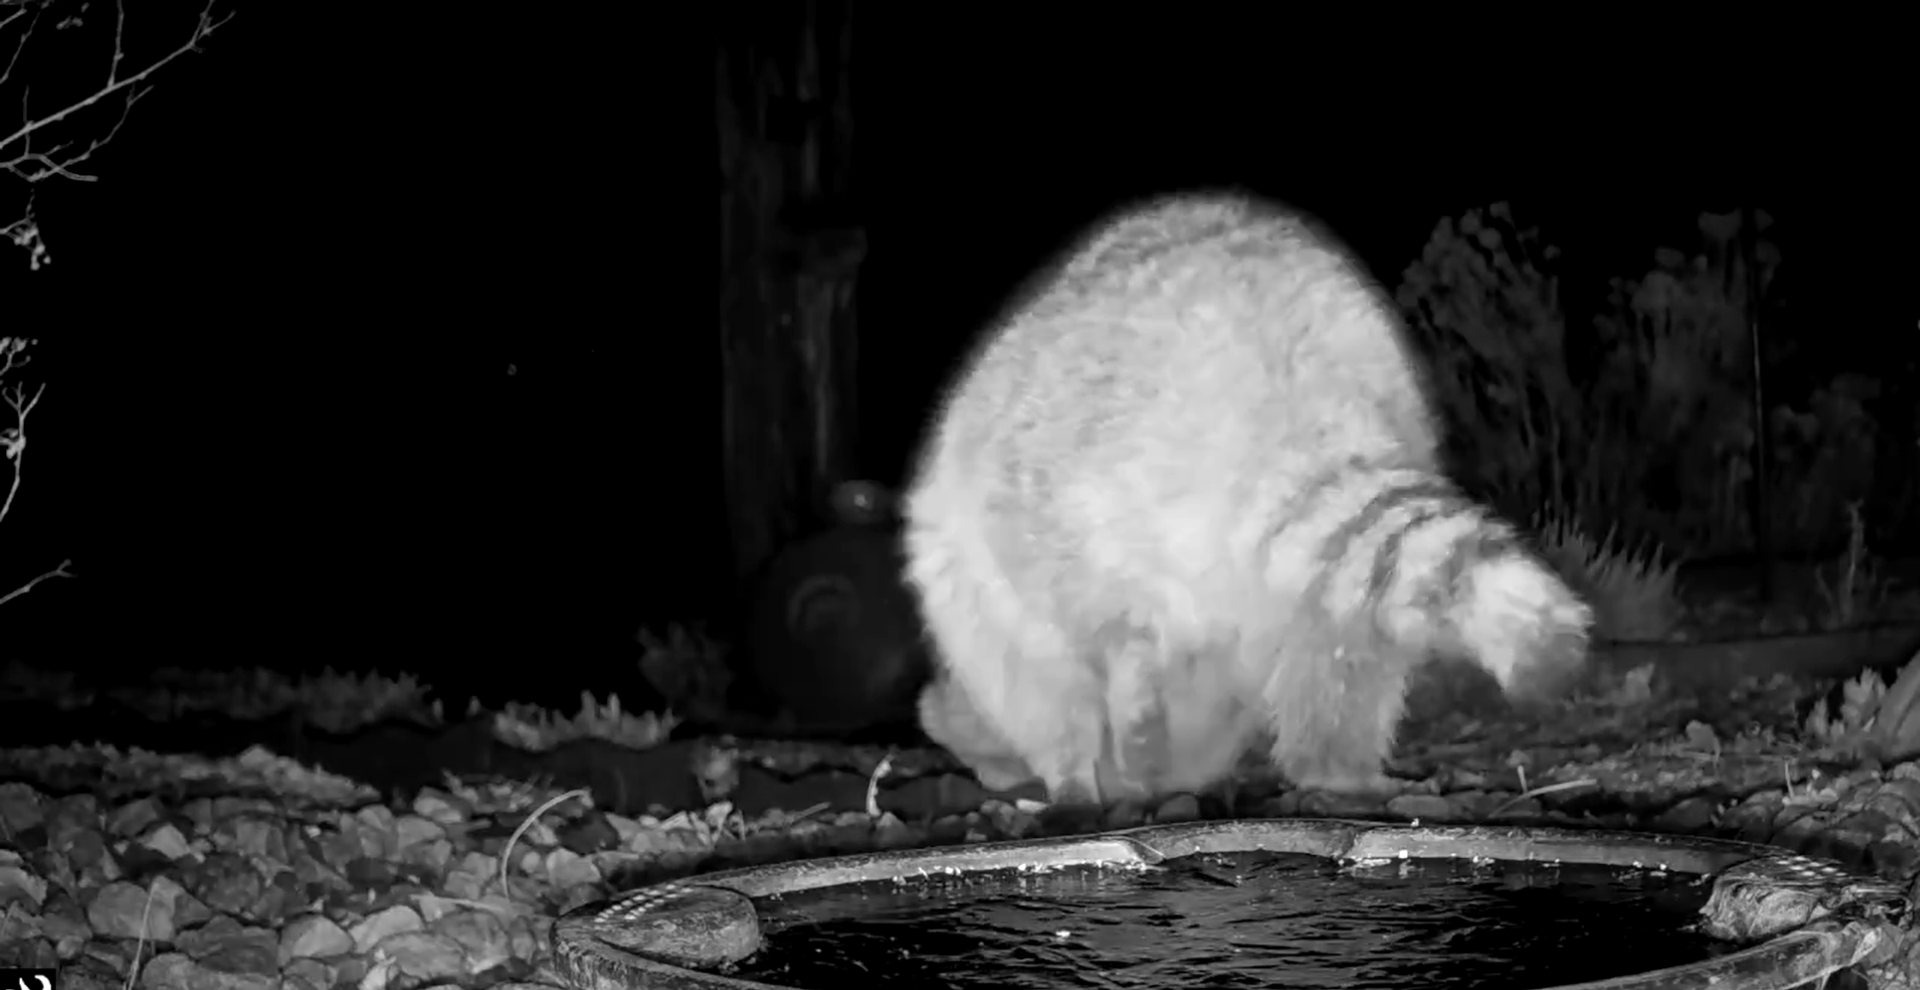 Night camera footage of a raccoon doing a handstand